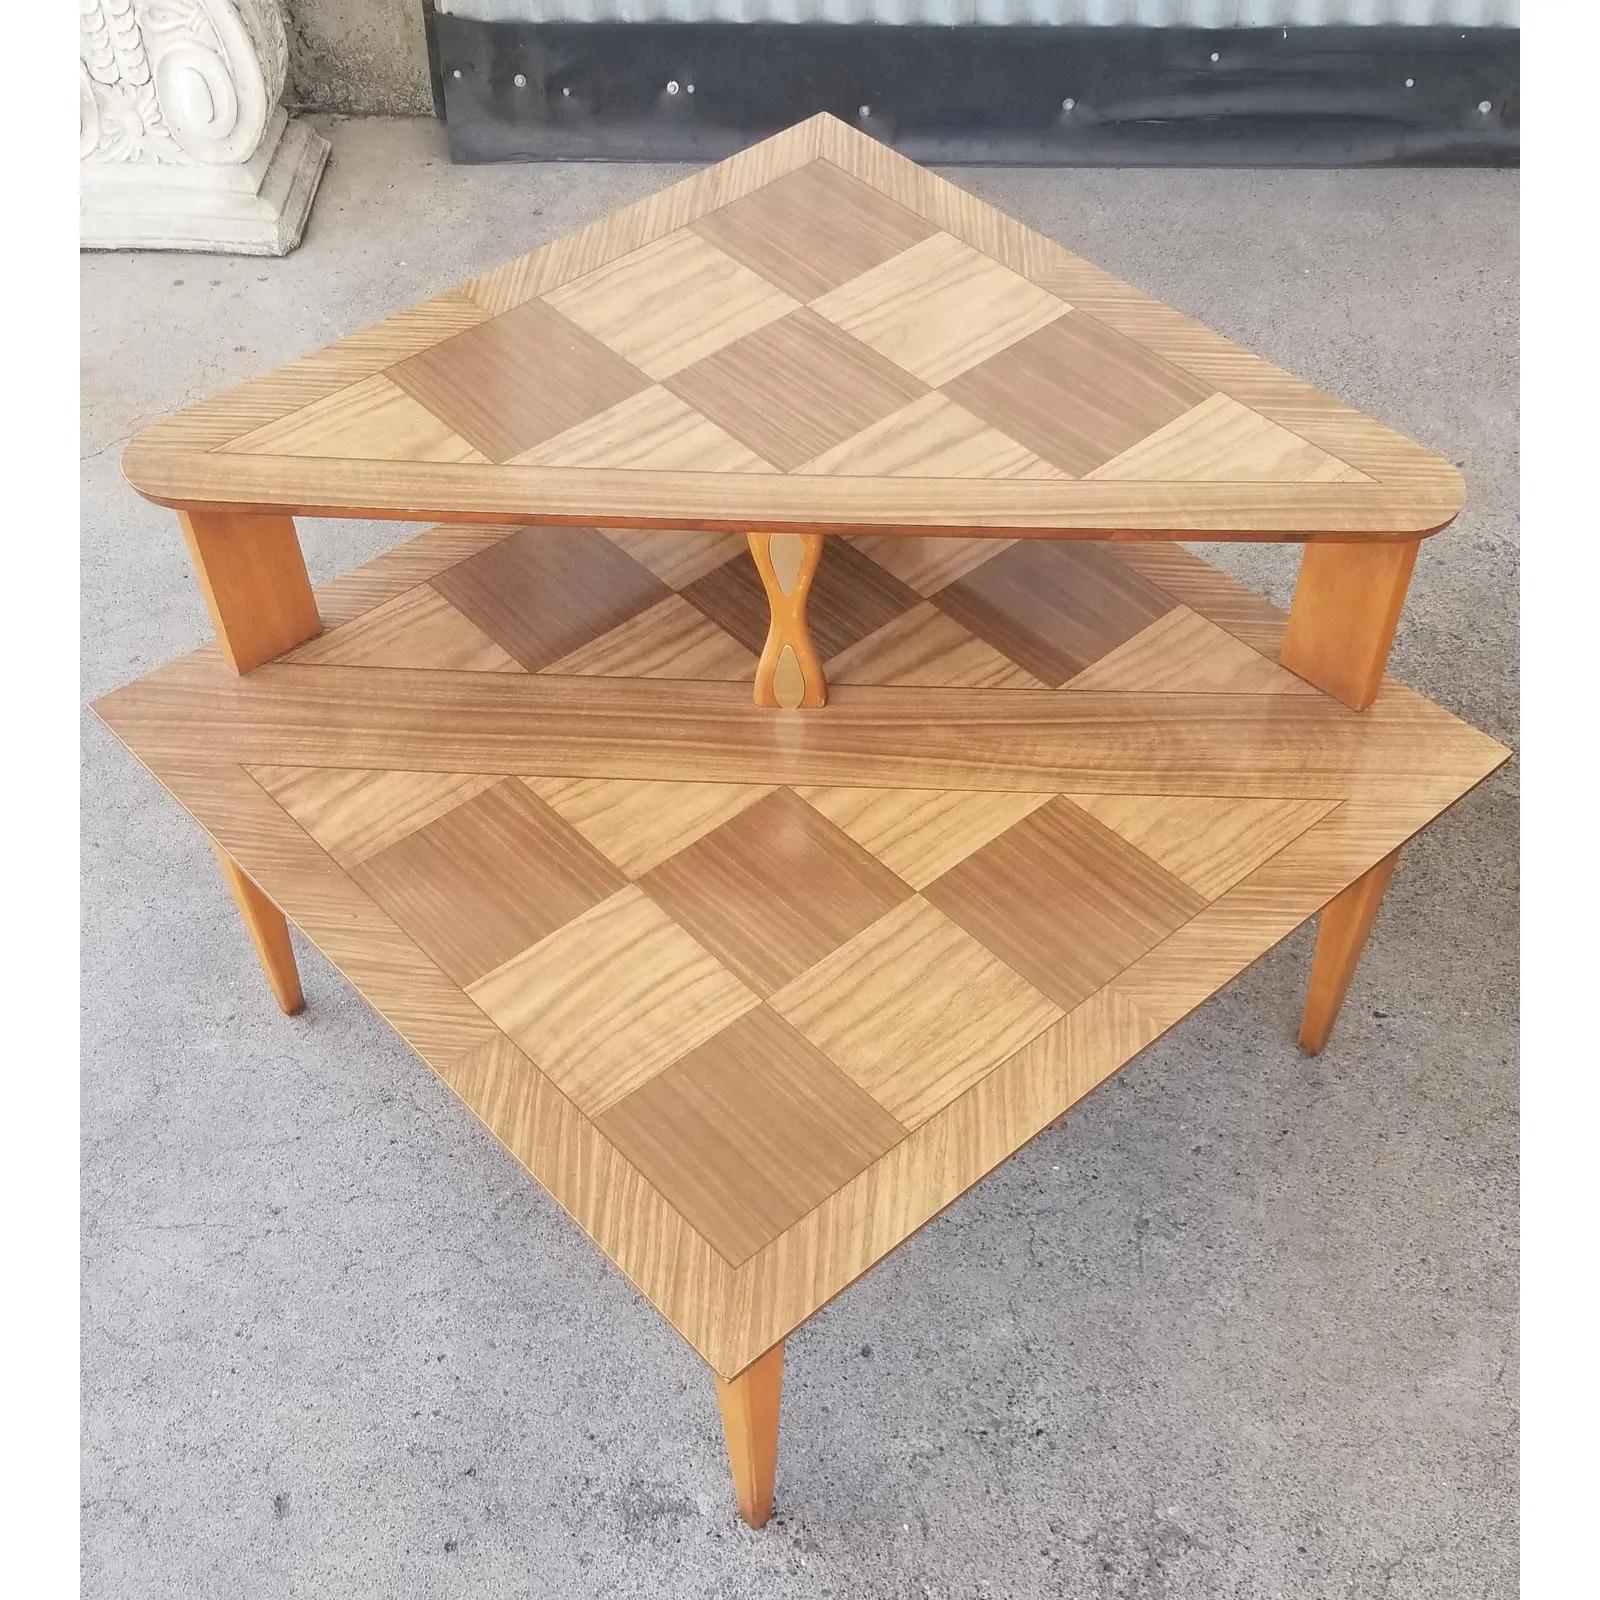 A pair of Mid-Century Modern corner side table by Lane Furniture. Unusual parquet tops made of faux grain Formica making these unique tables very durable. Both tables branded with the Lane Furniture logo. Amazing, original condition. Lower table